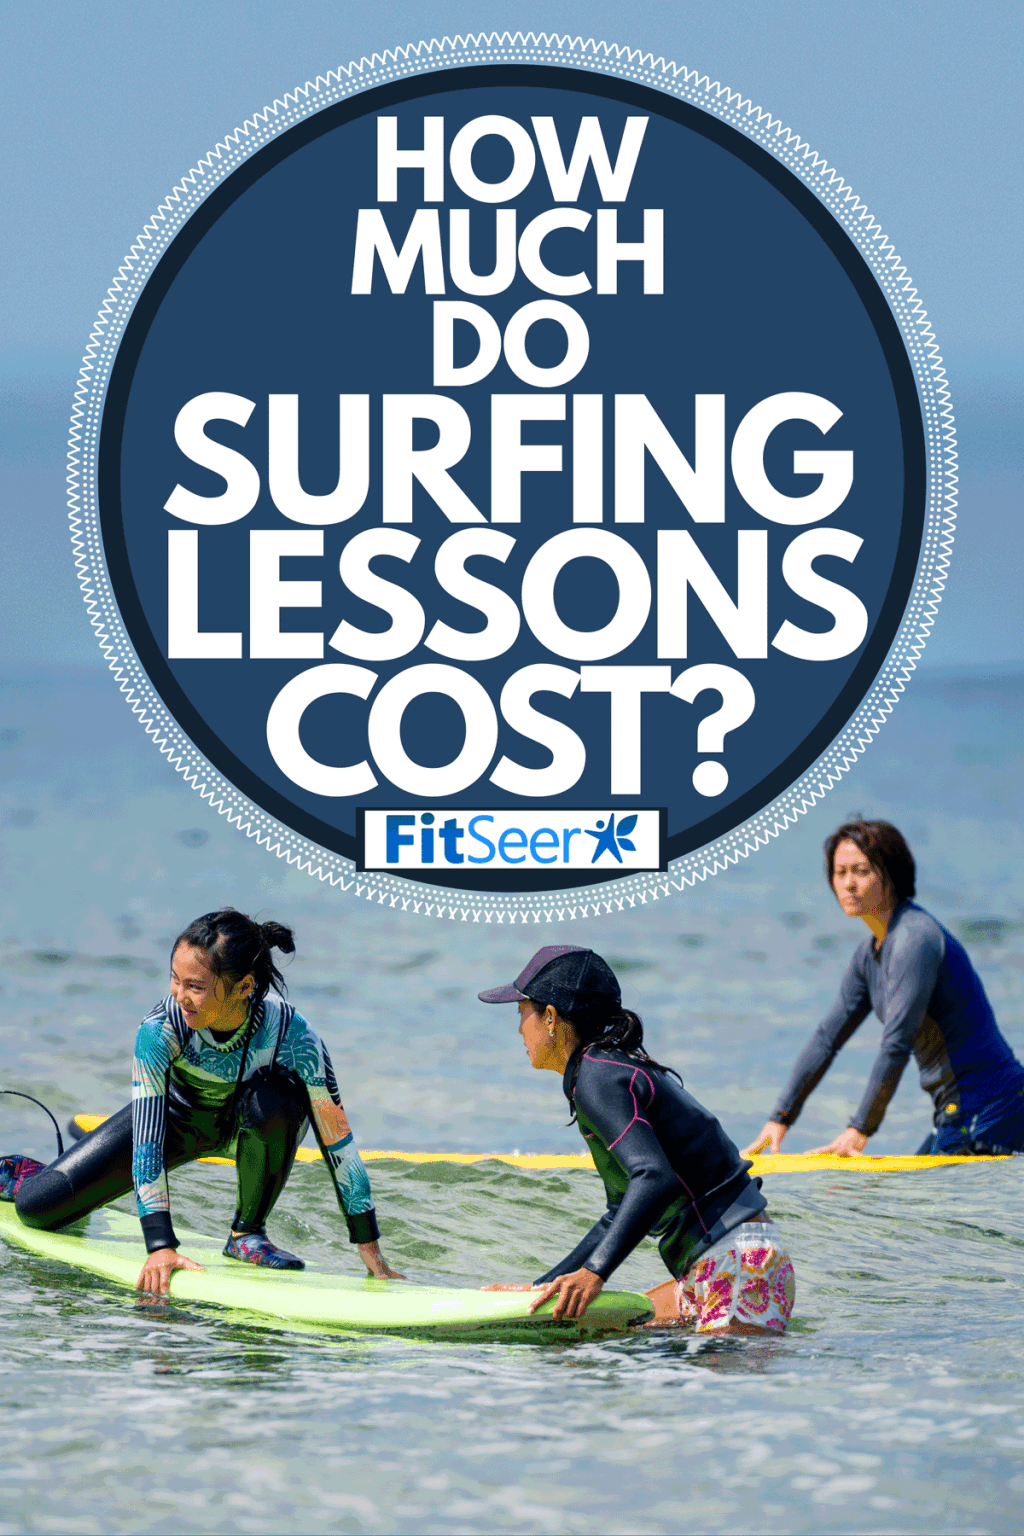 How Much Do Surfing Lessons Cost? – FitSeer.com